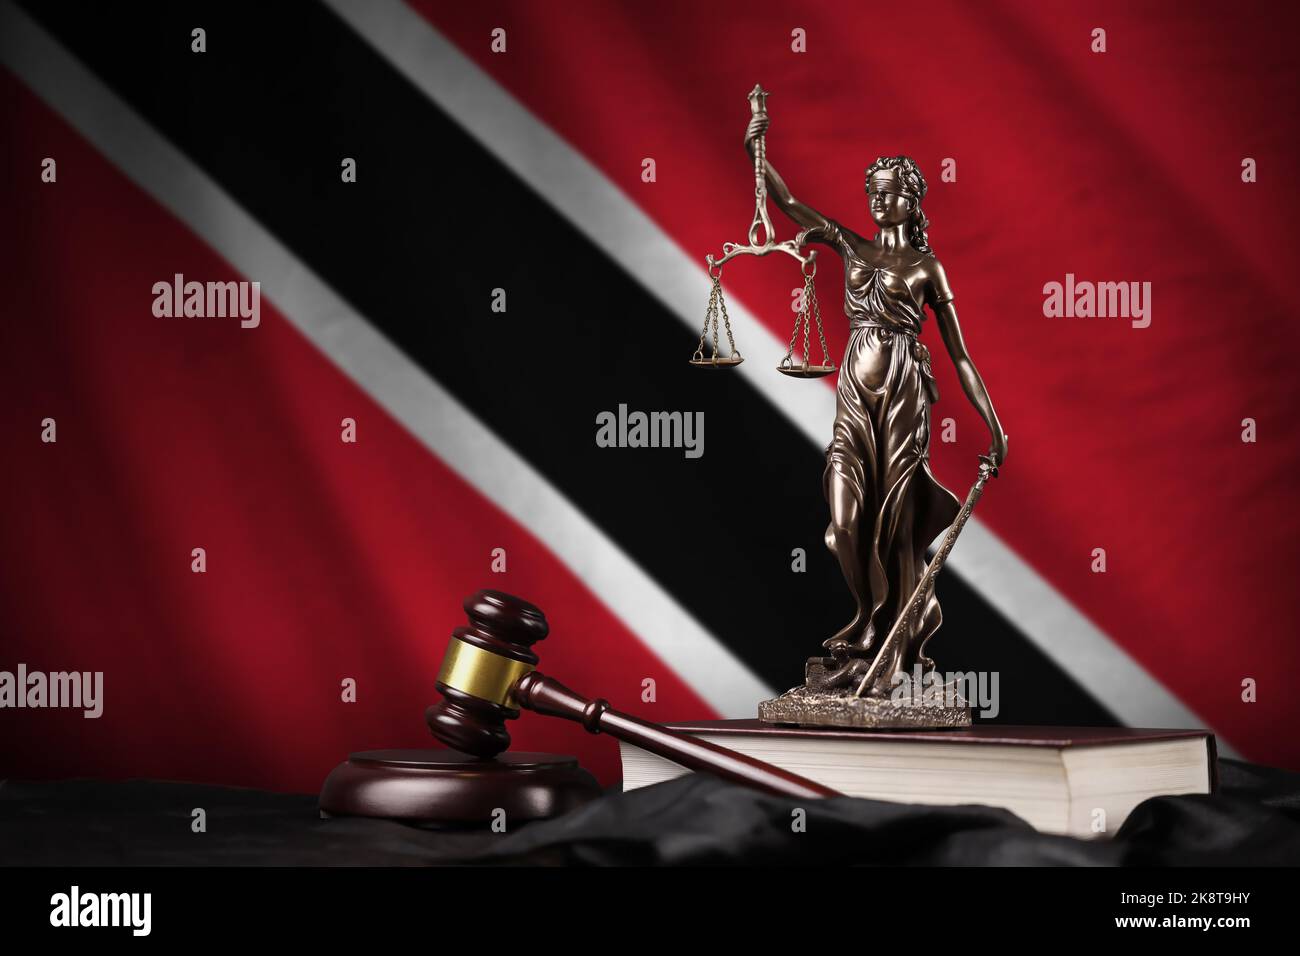 Trinidad and Tobago flag with statue of lady justice, constitution and judge hammer on black drapery. Concept of judgement and punishment Stock Photo